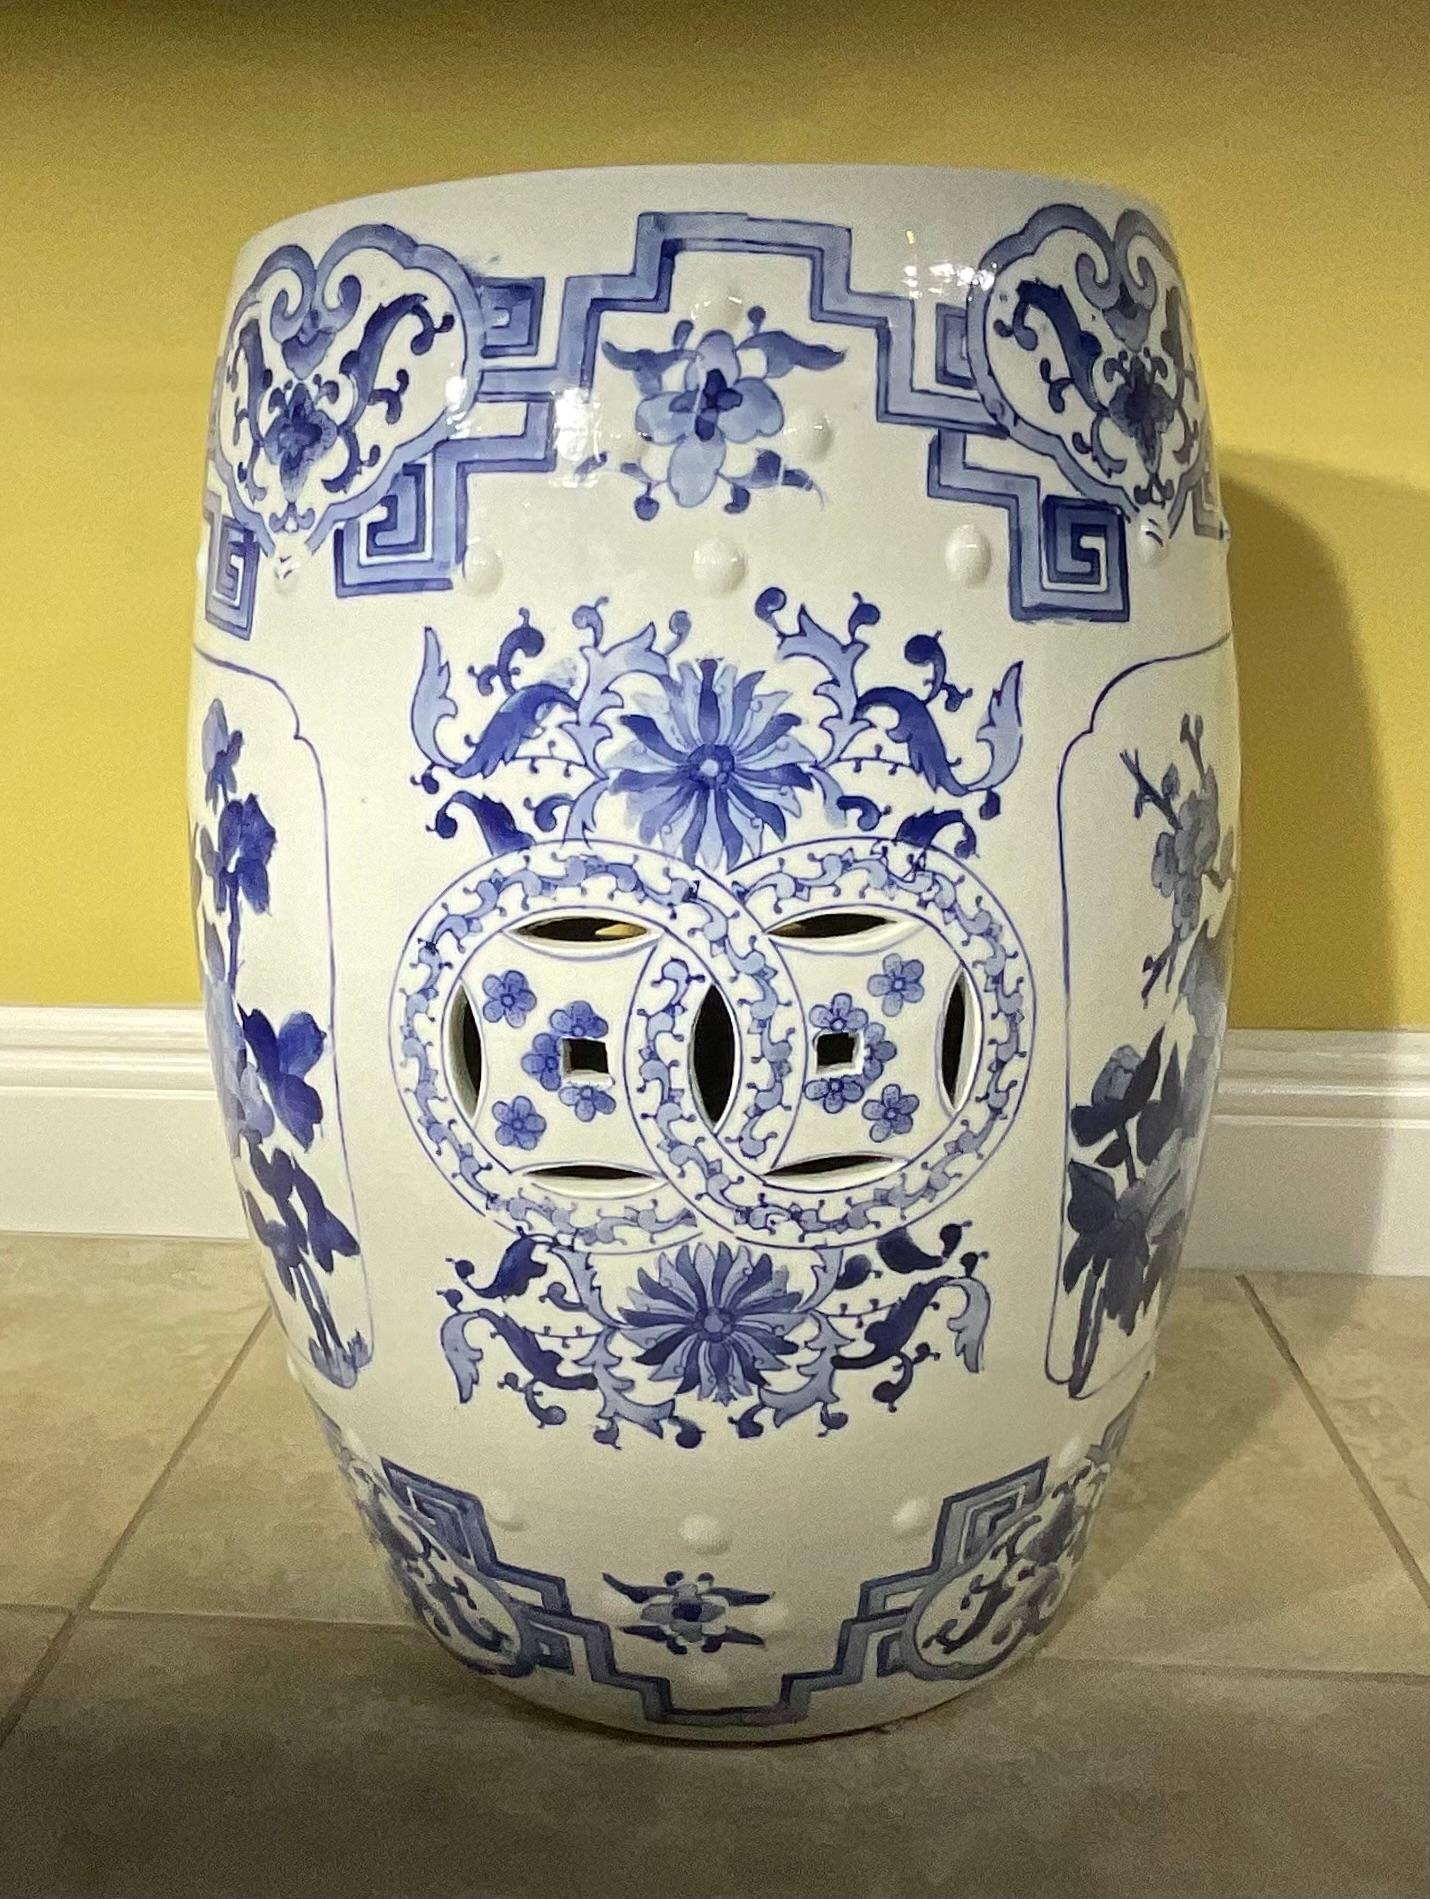 Ceramic Asian Garden Seat in Blue and White Floral Motifs In Good Condition For Sale In Delray Beach, FL